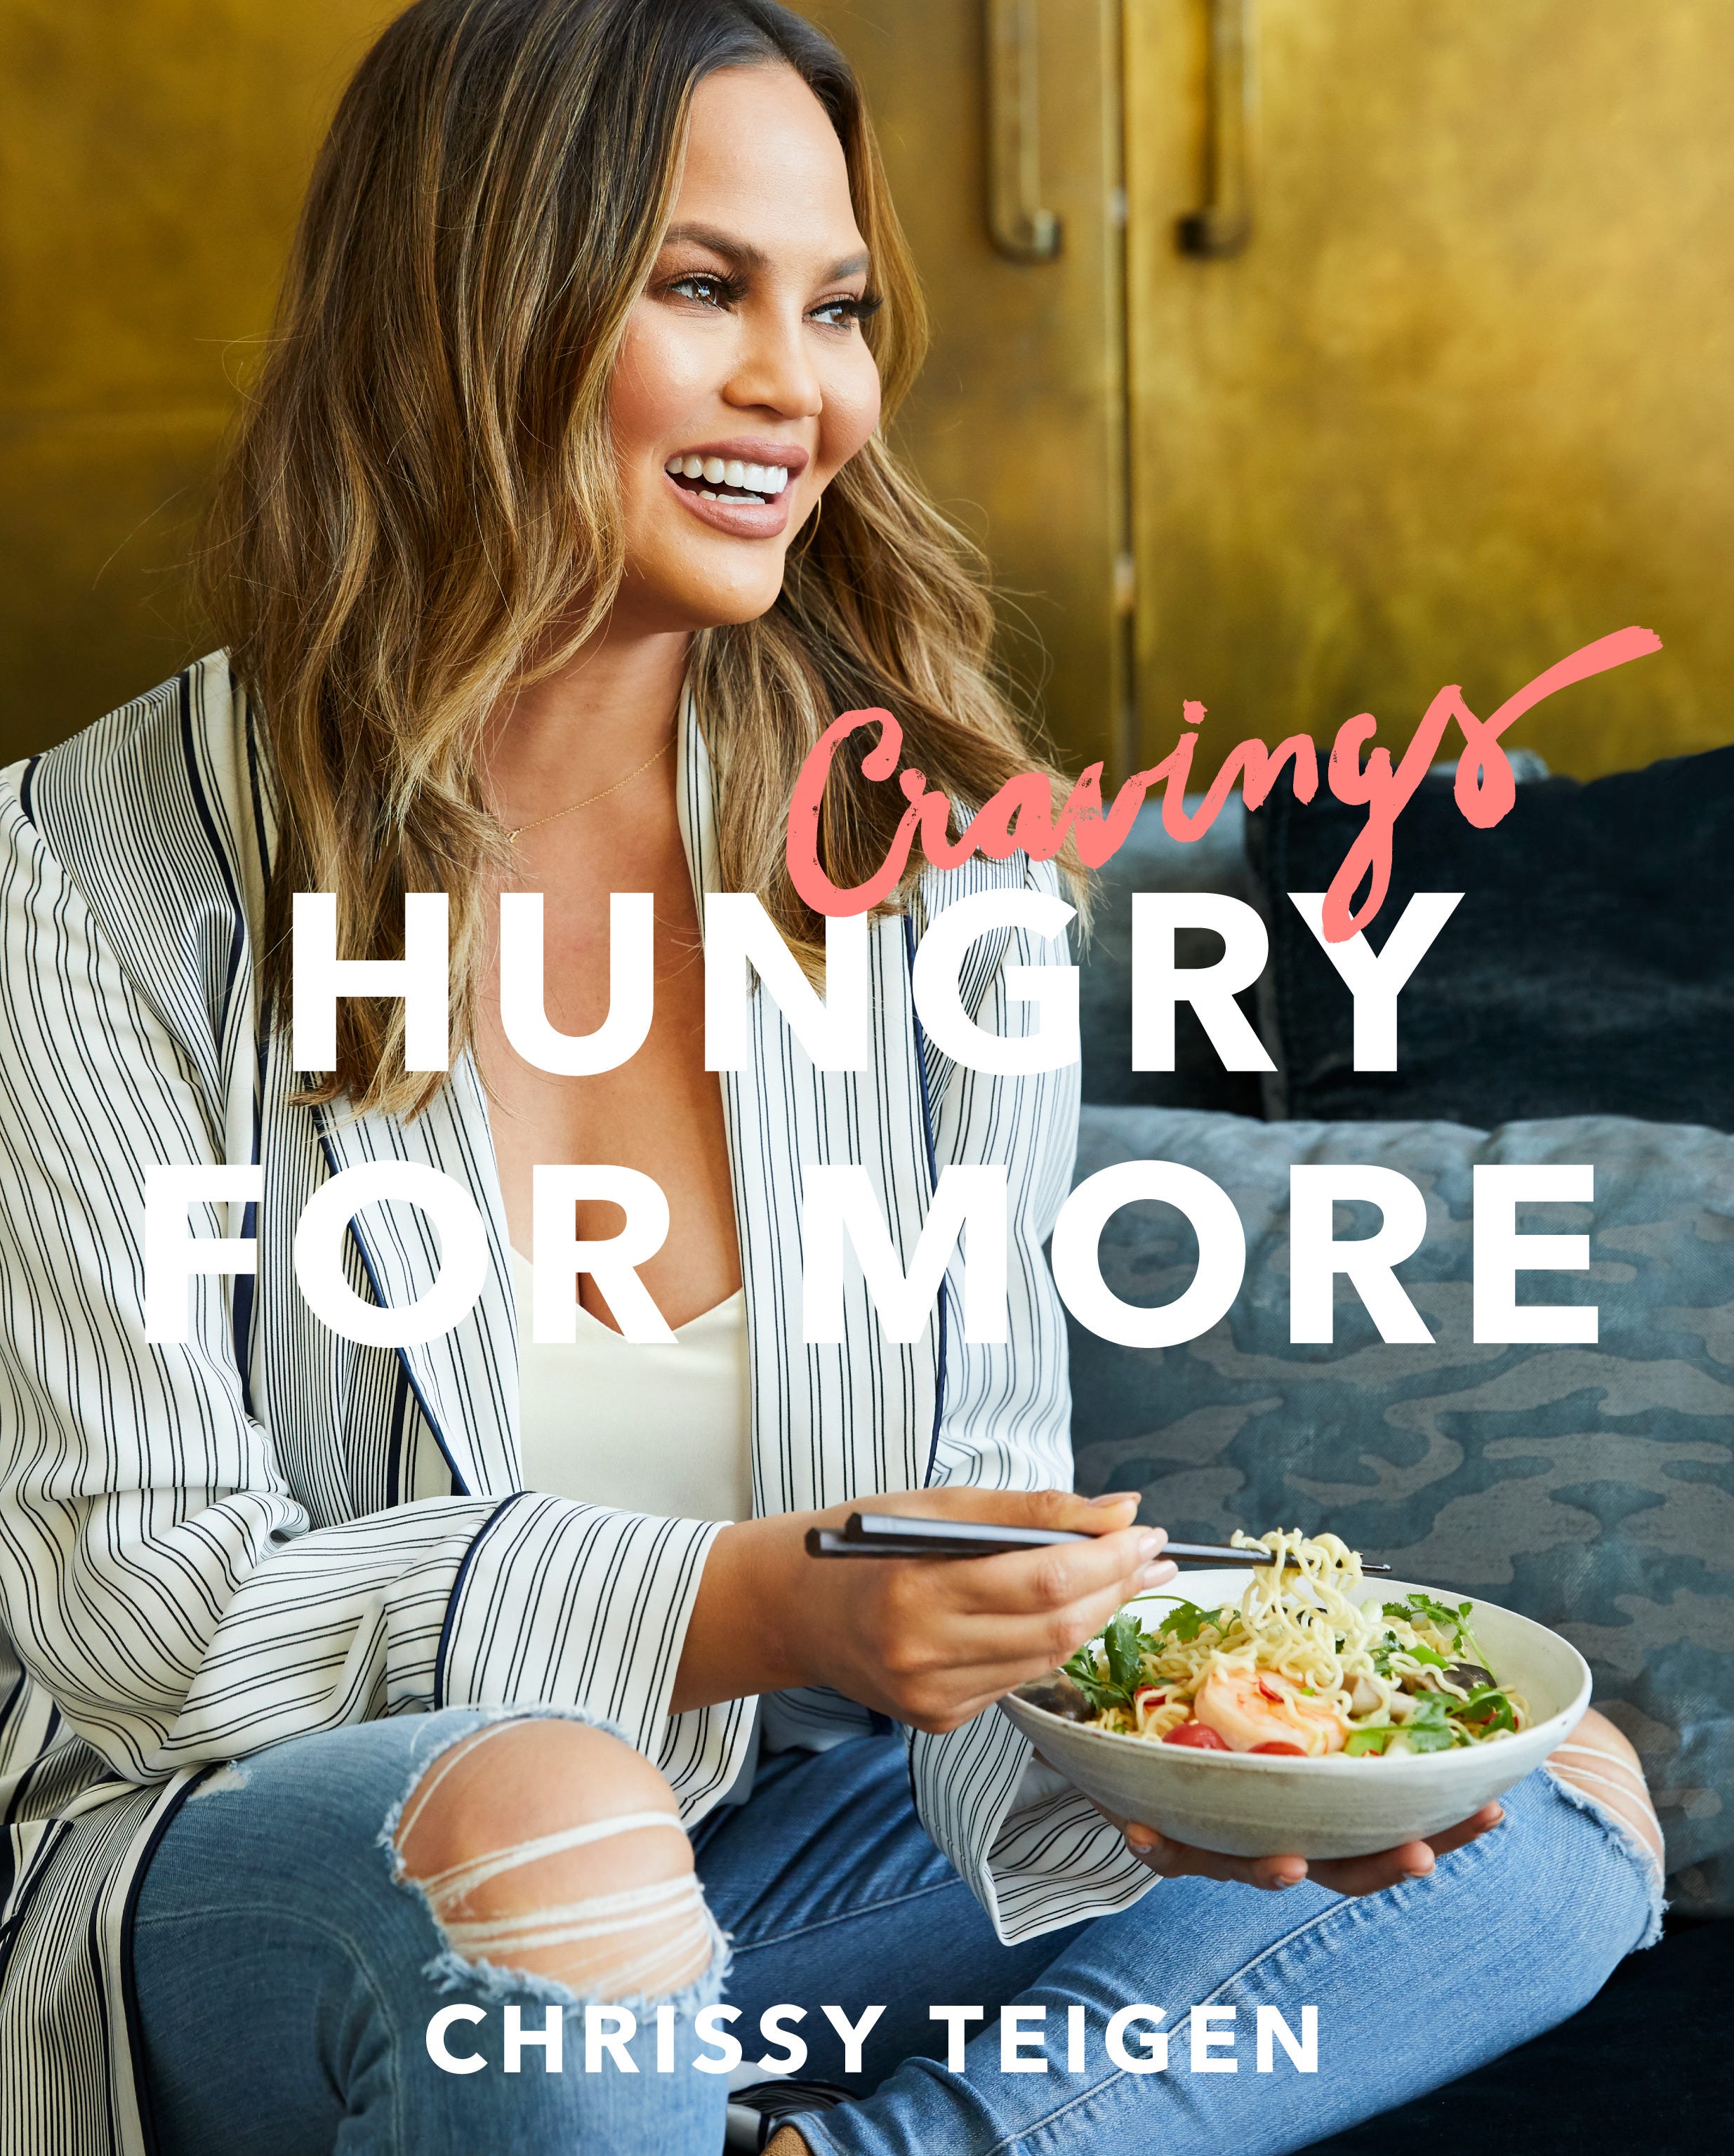 Chrissy Teigen follows up her No. 1 USA TODAY best-seller with "Cravings: Hungry for More."